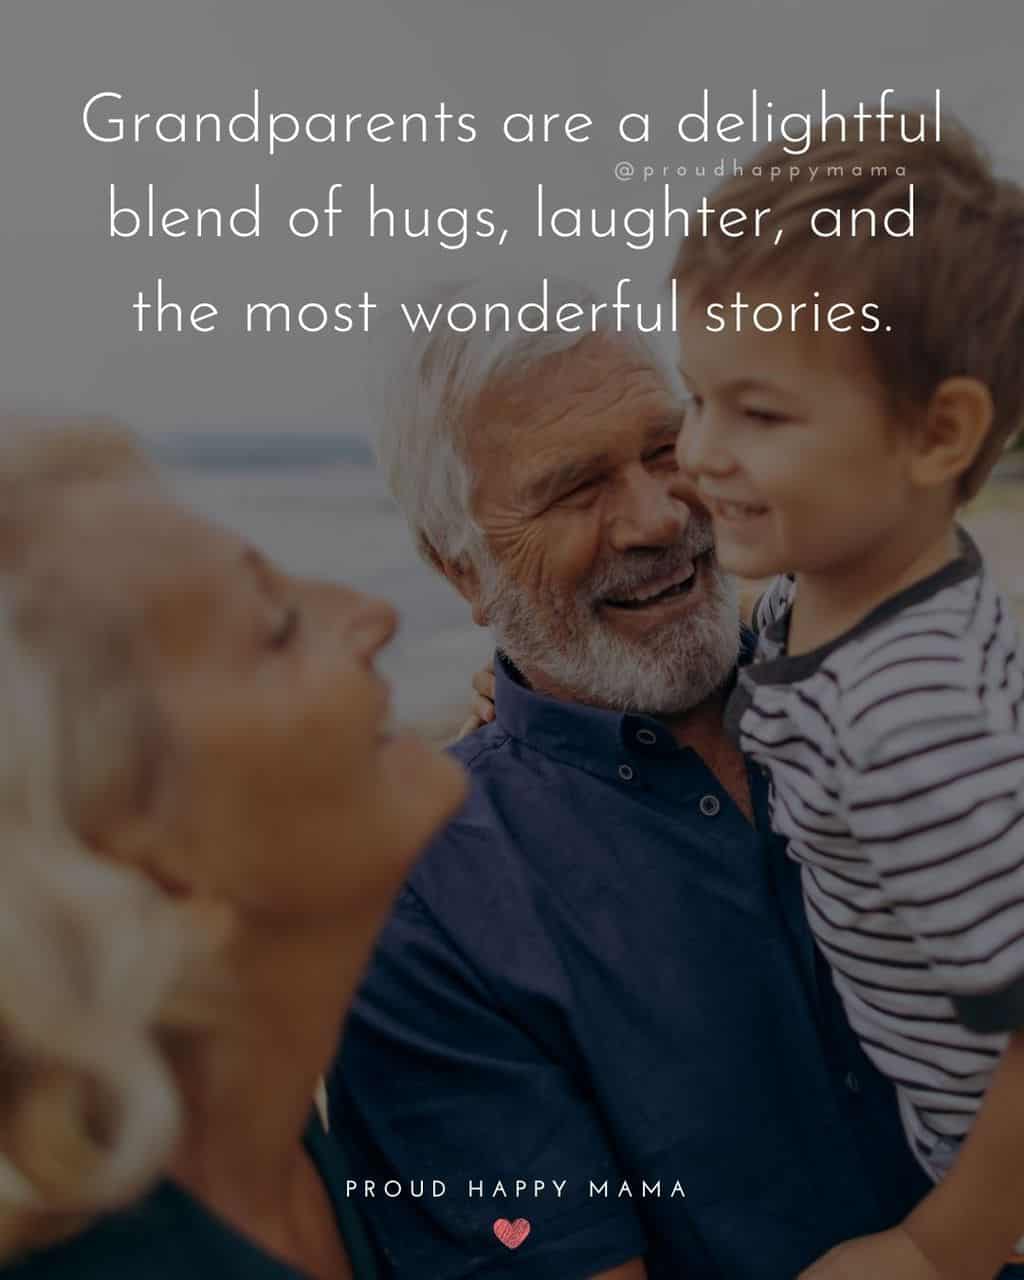 Grandparent Quotes – Grandparents are a delightful blend of hugs, laughter, and the most wonderful stories.’